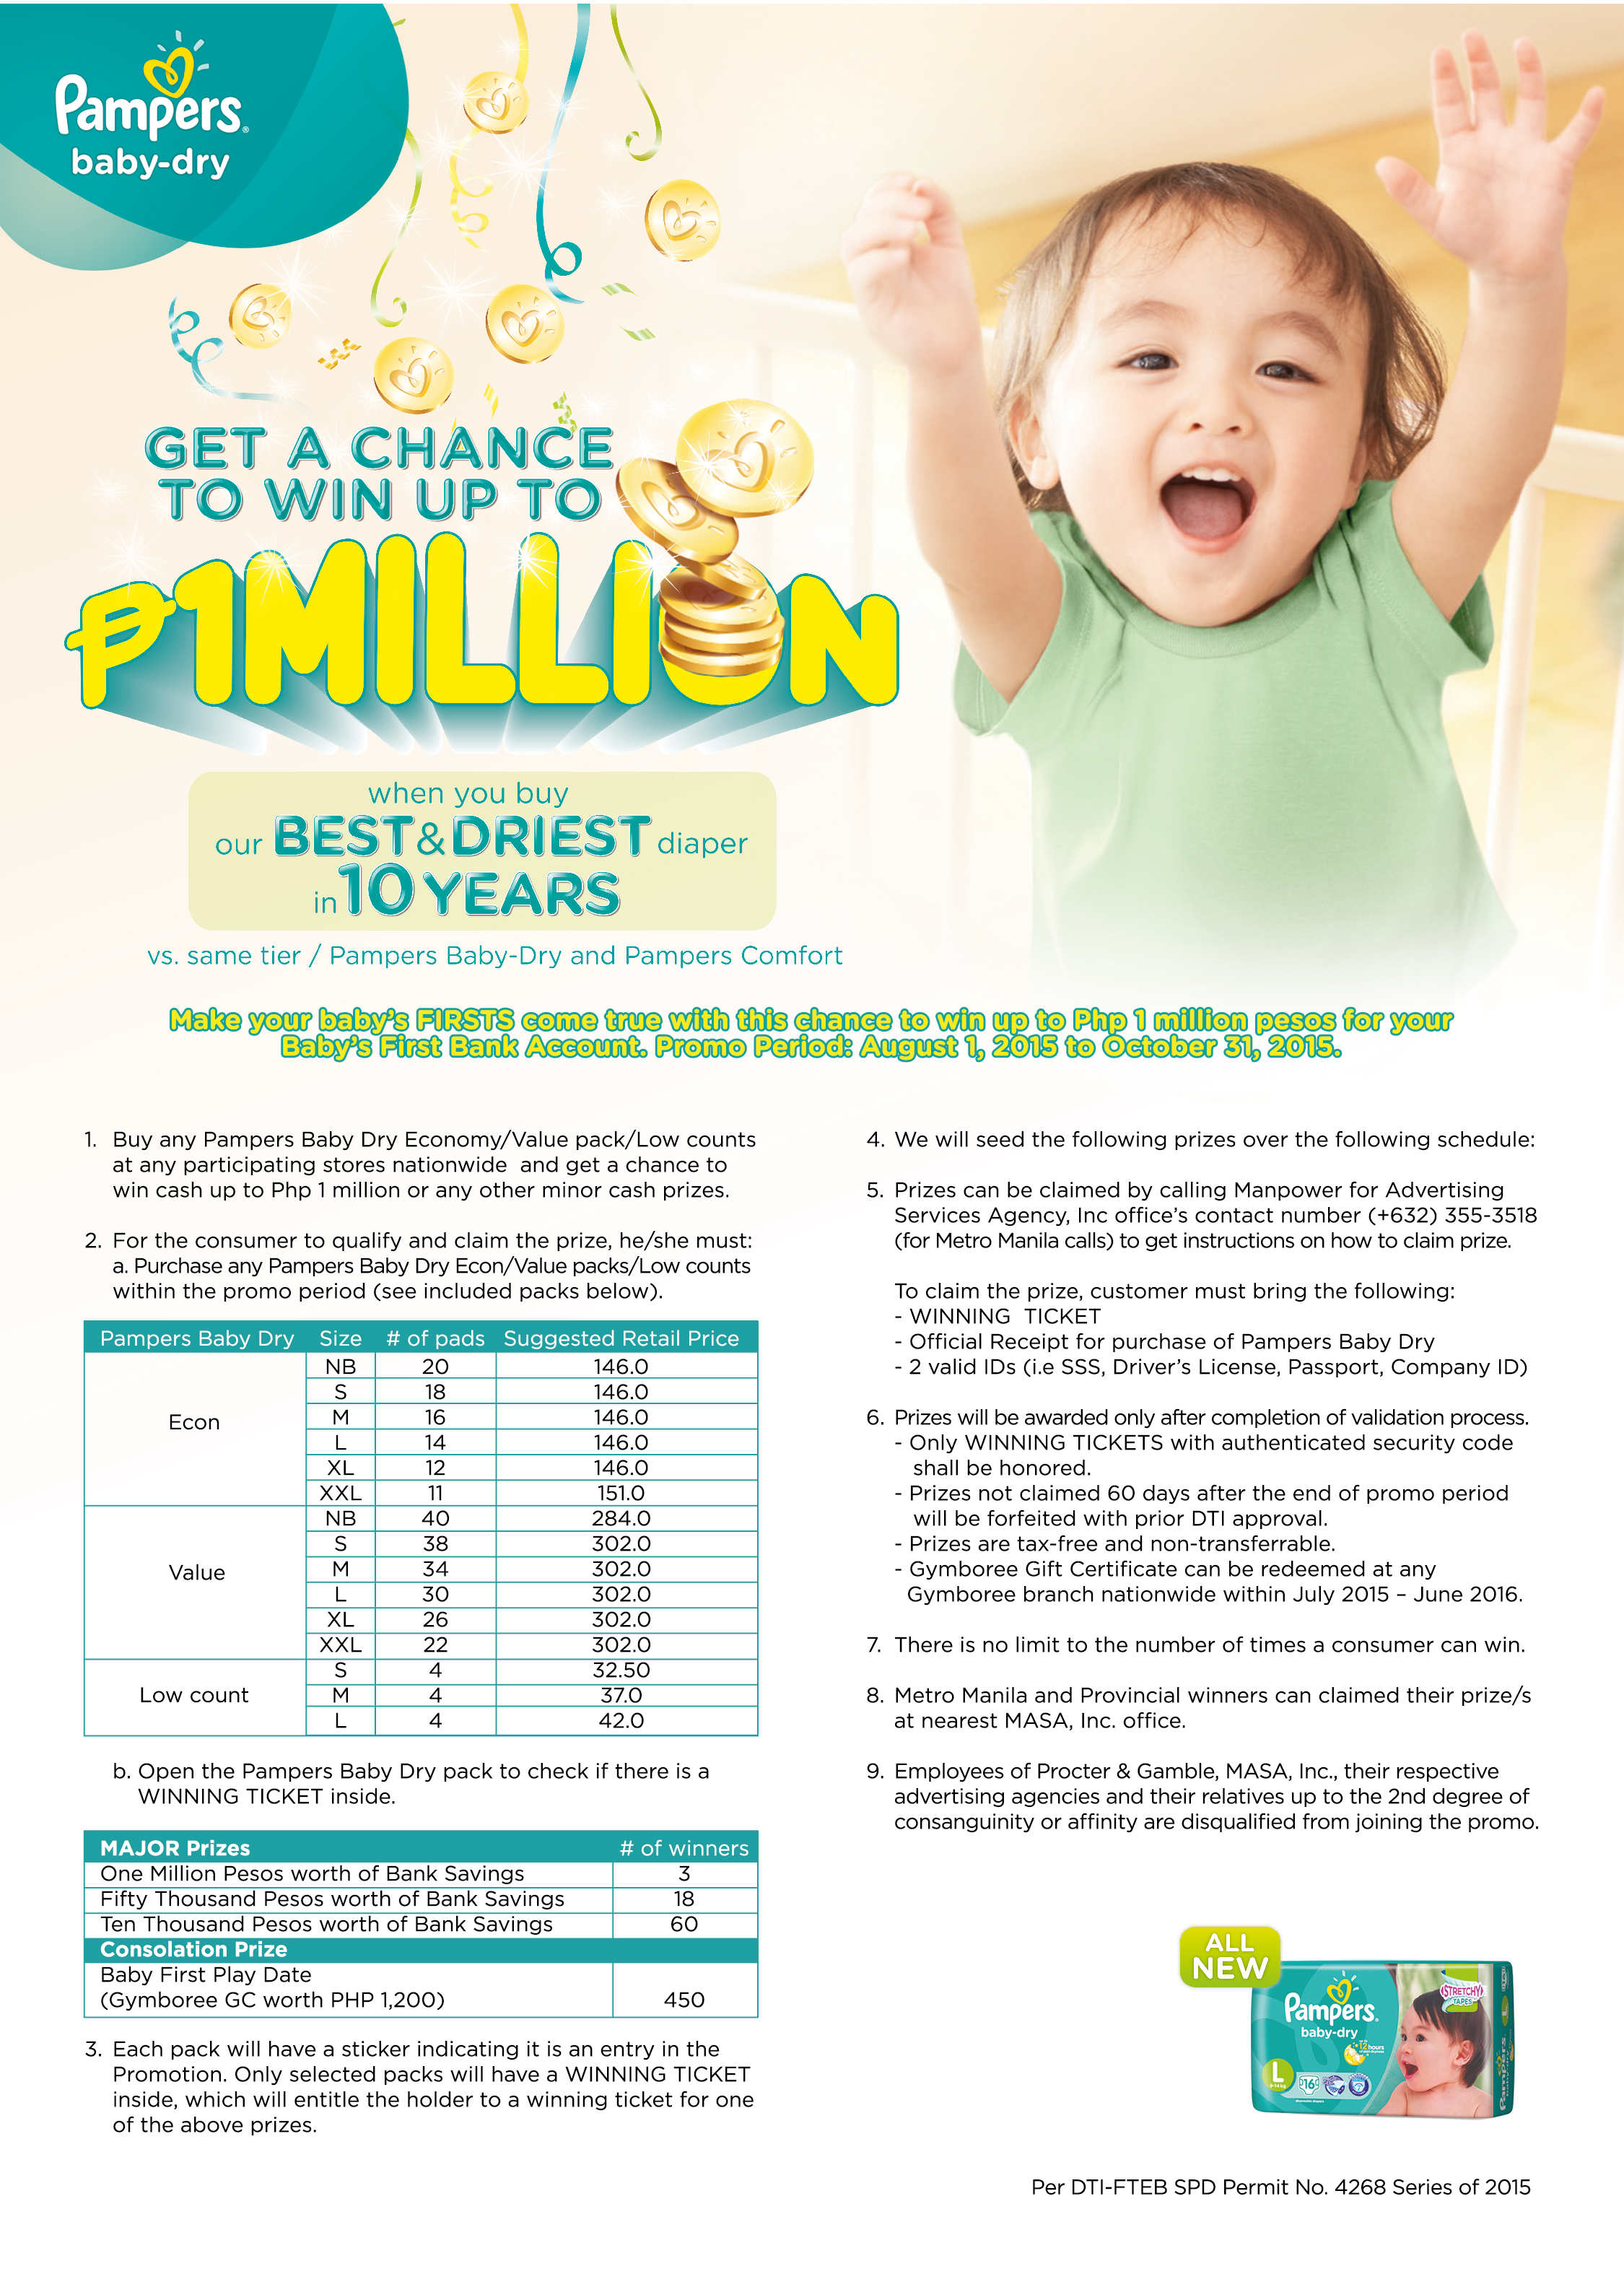 pampers first million poster